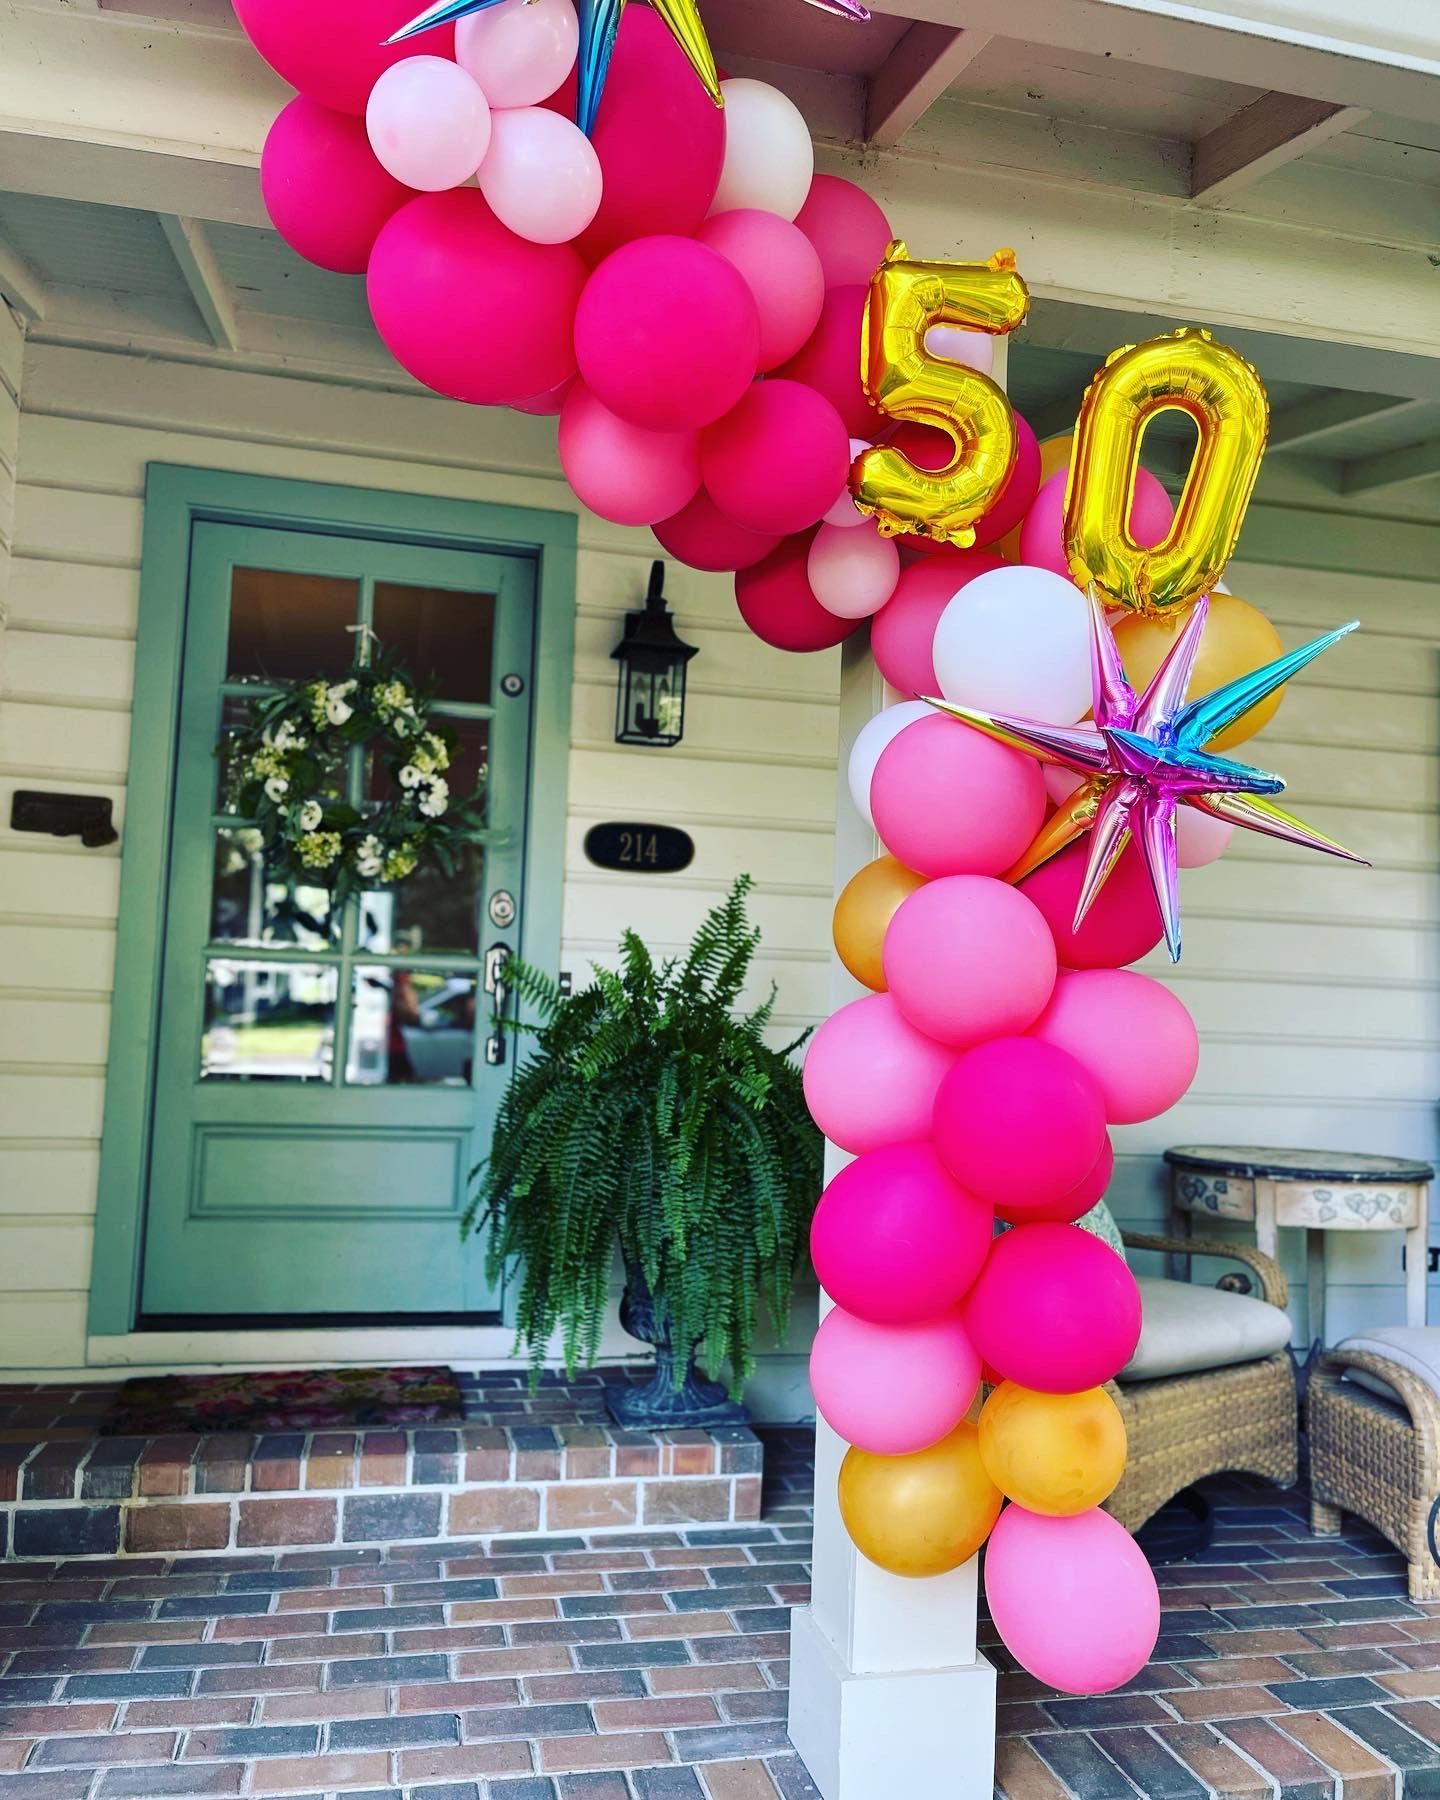 A porch decorated with pink and gold balloons for a 50th birthday